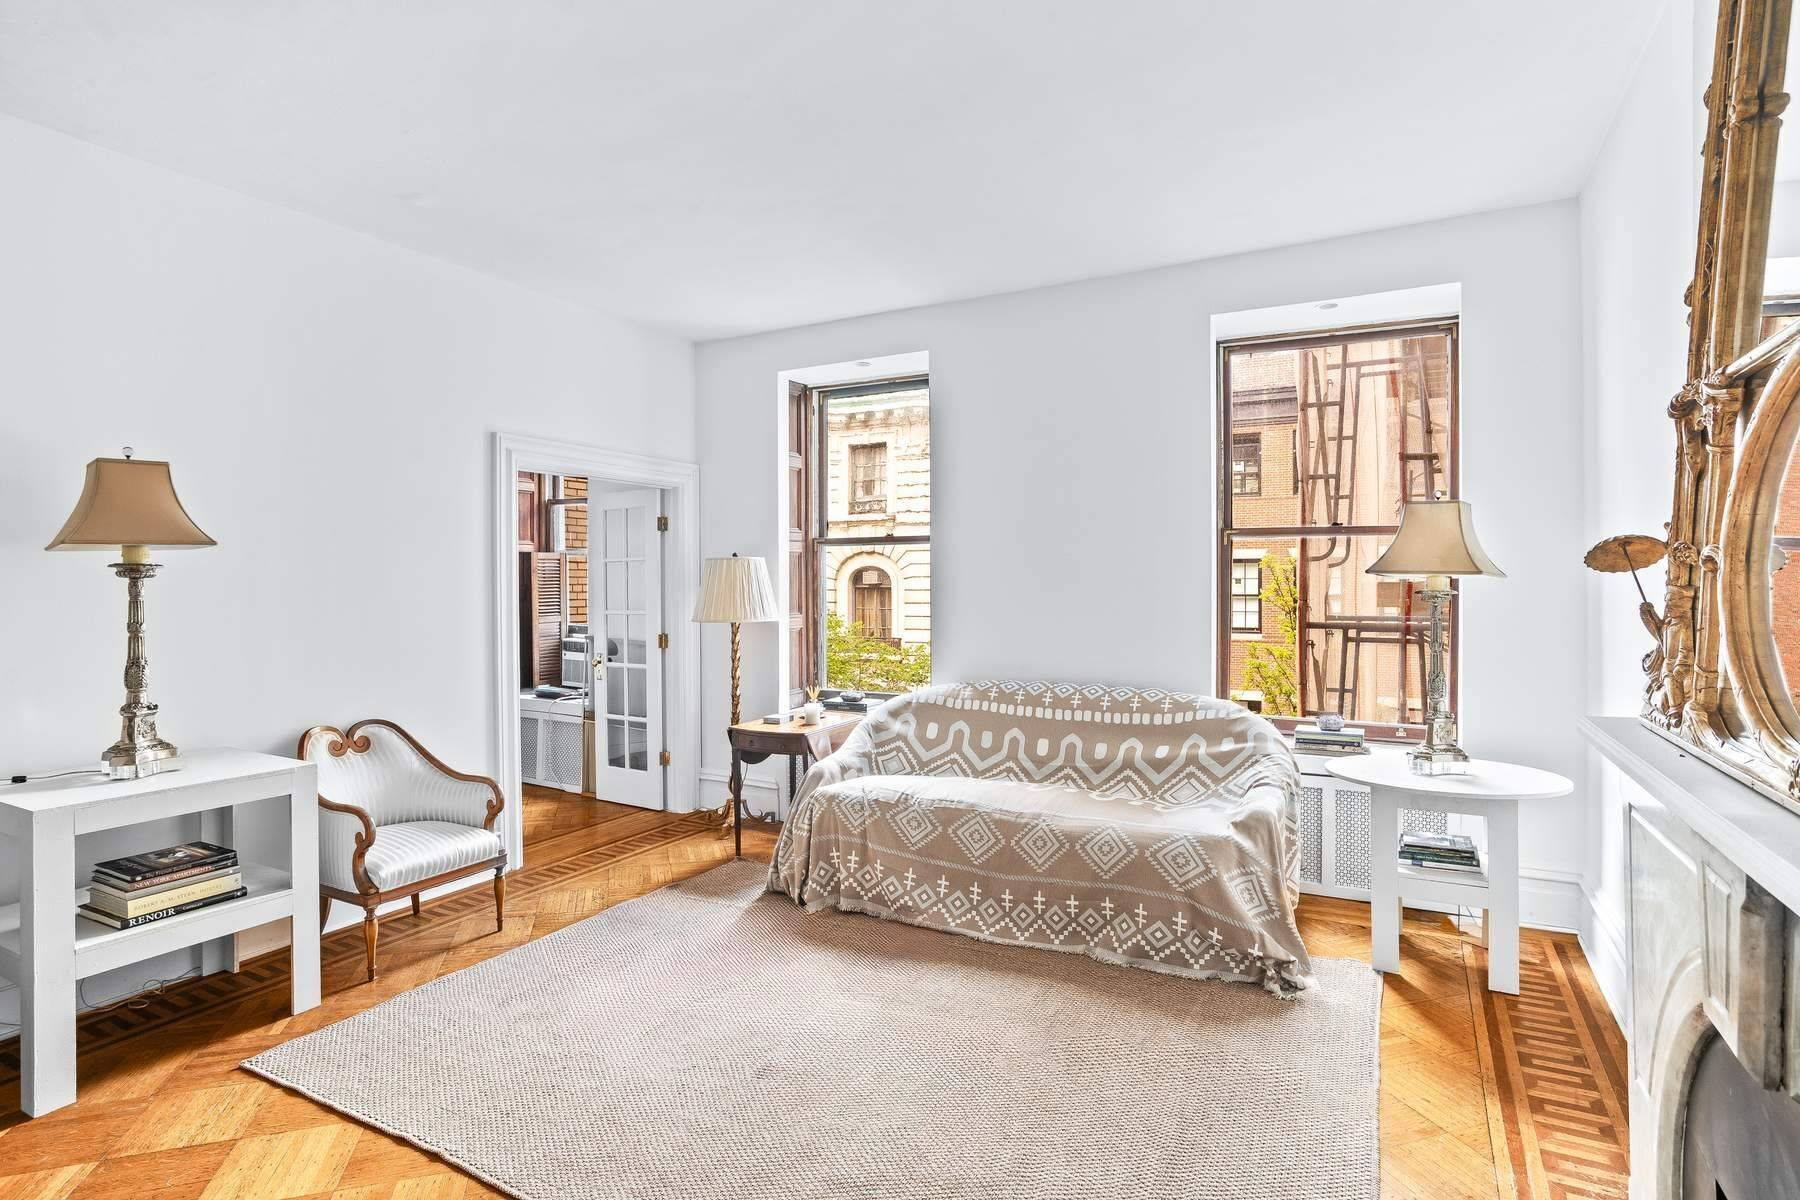 This charming 1 bedroom townhouse apartment with elevator is located steps off Madison Avenue and would make for a wonderful and sophisticated pied a terre in a prime Upper East ...